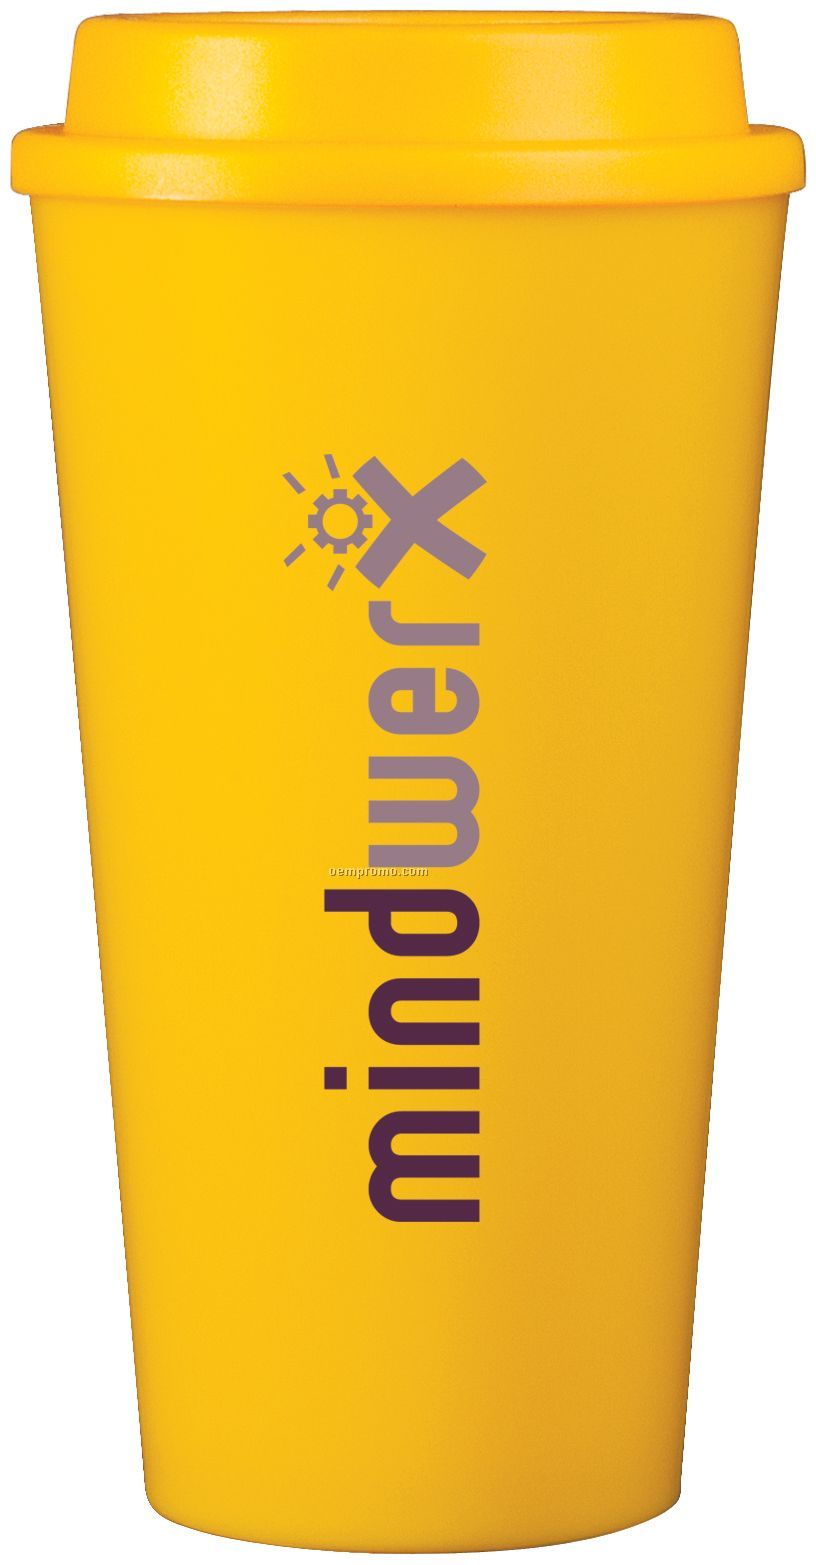 16 Oz. Yellow Plastic Cup2go Cup